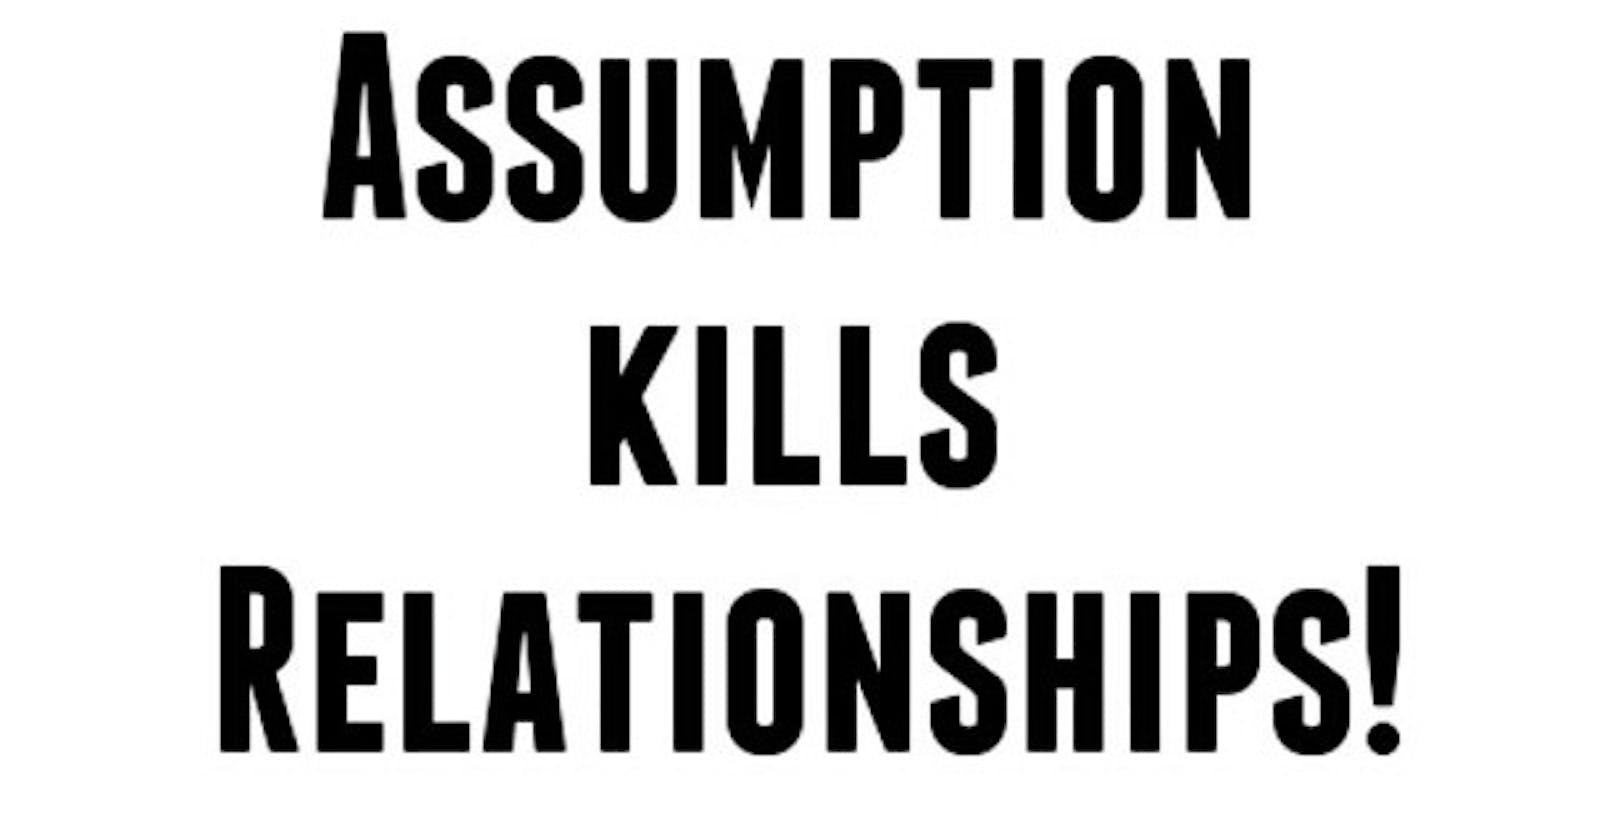 A wrong assumption has ruined many relationships.